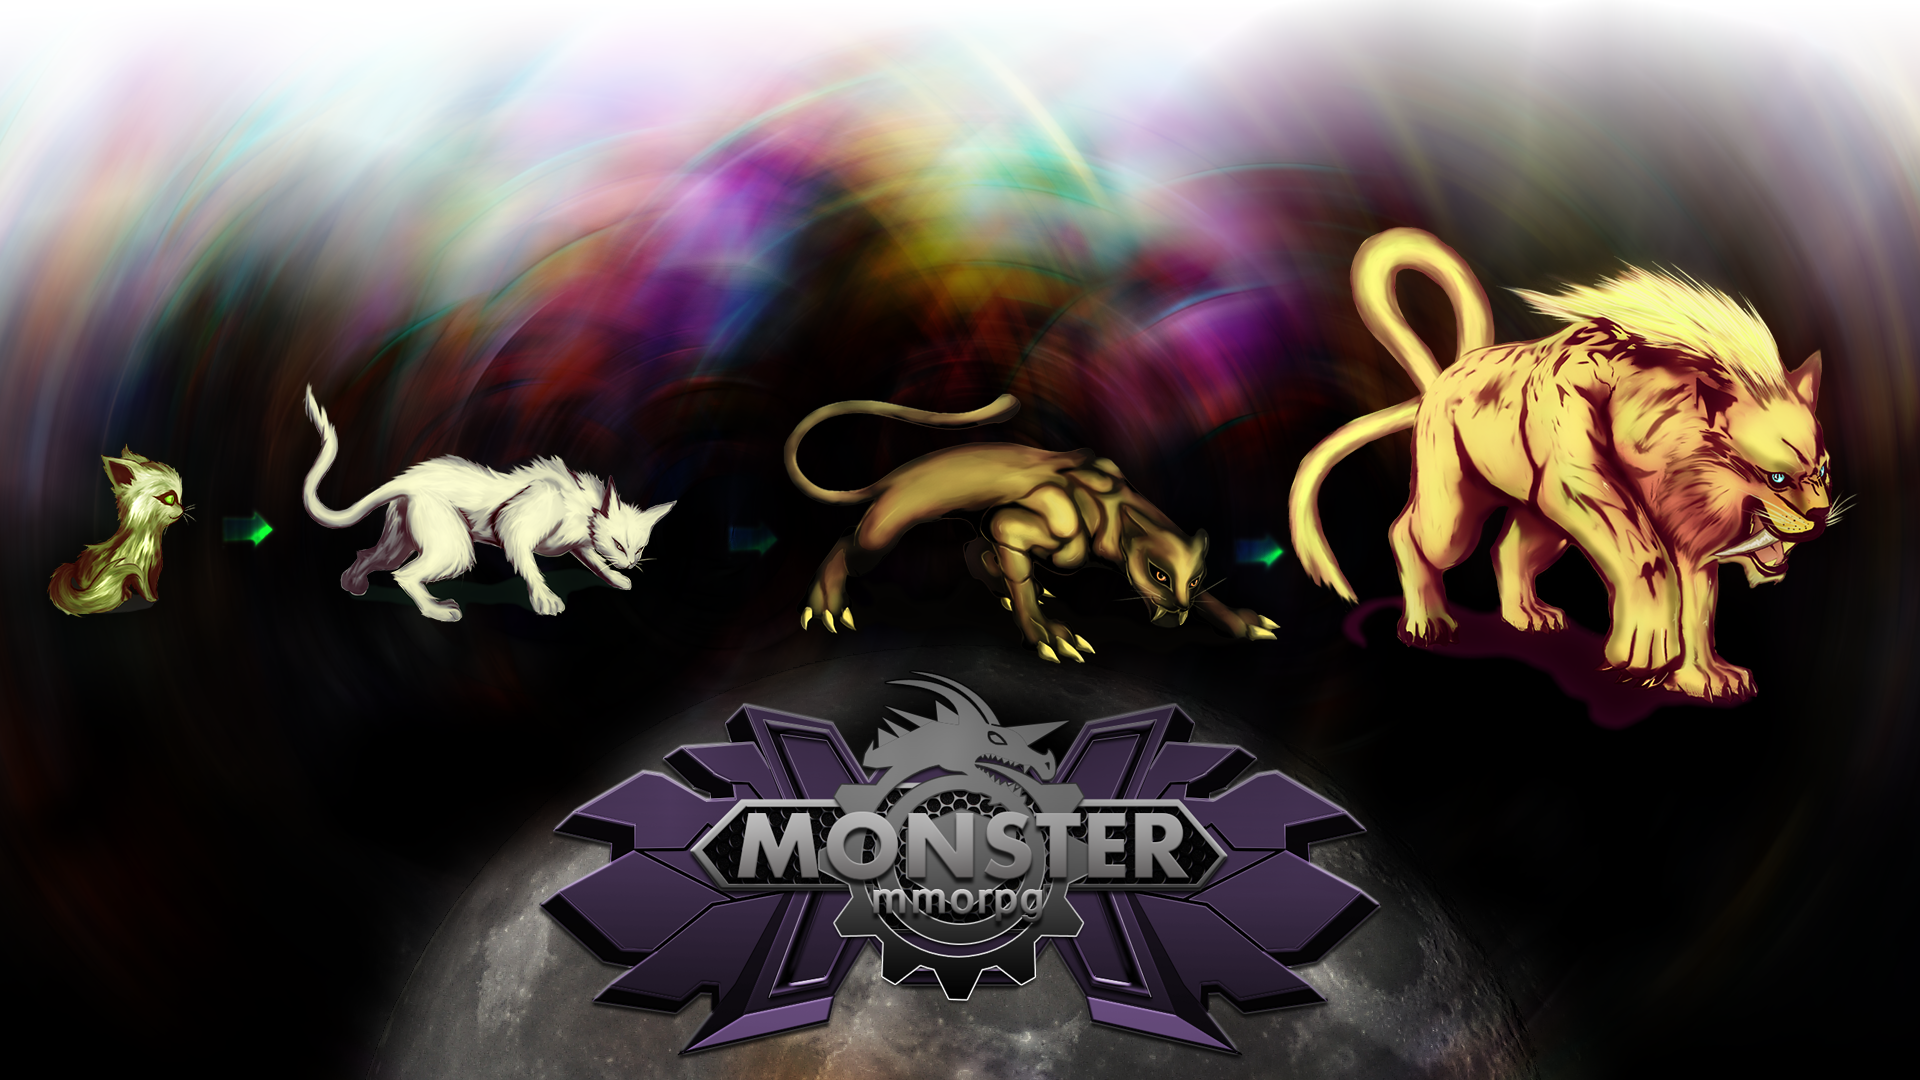 Great-MMO-Game-Monster-MMORPG-Wallpaper.png